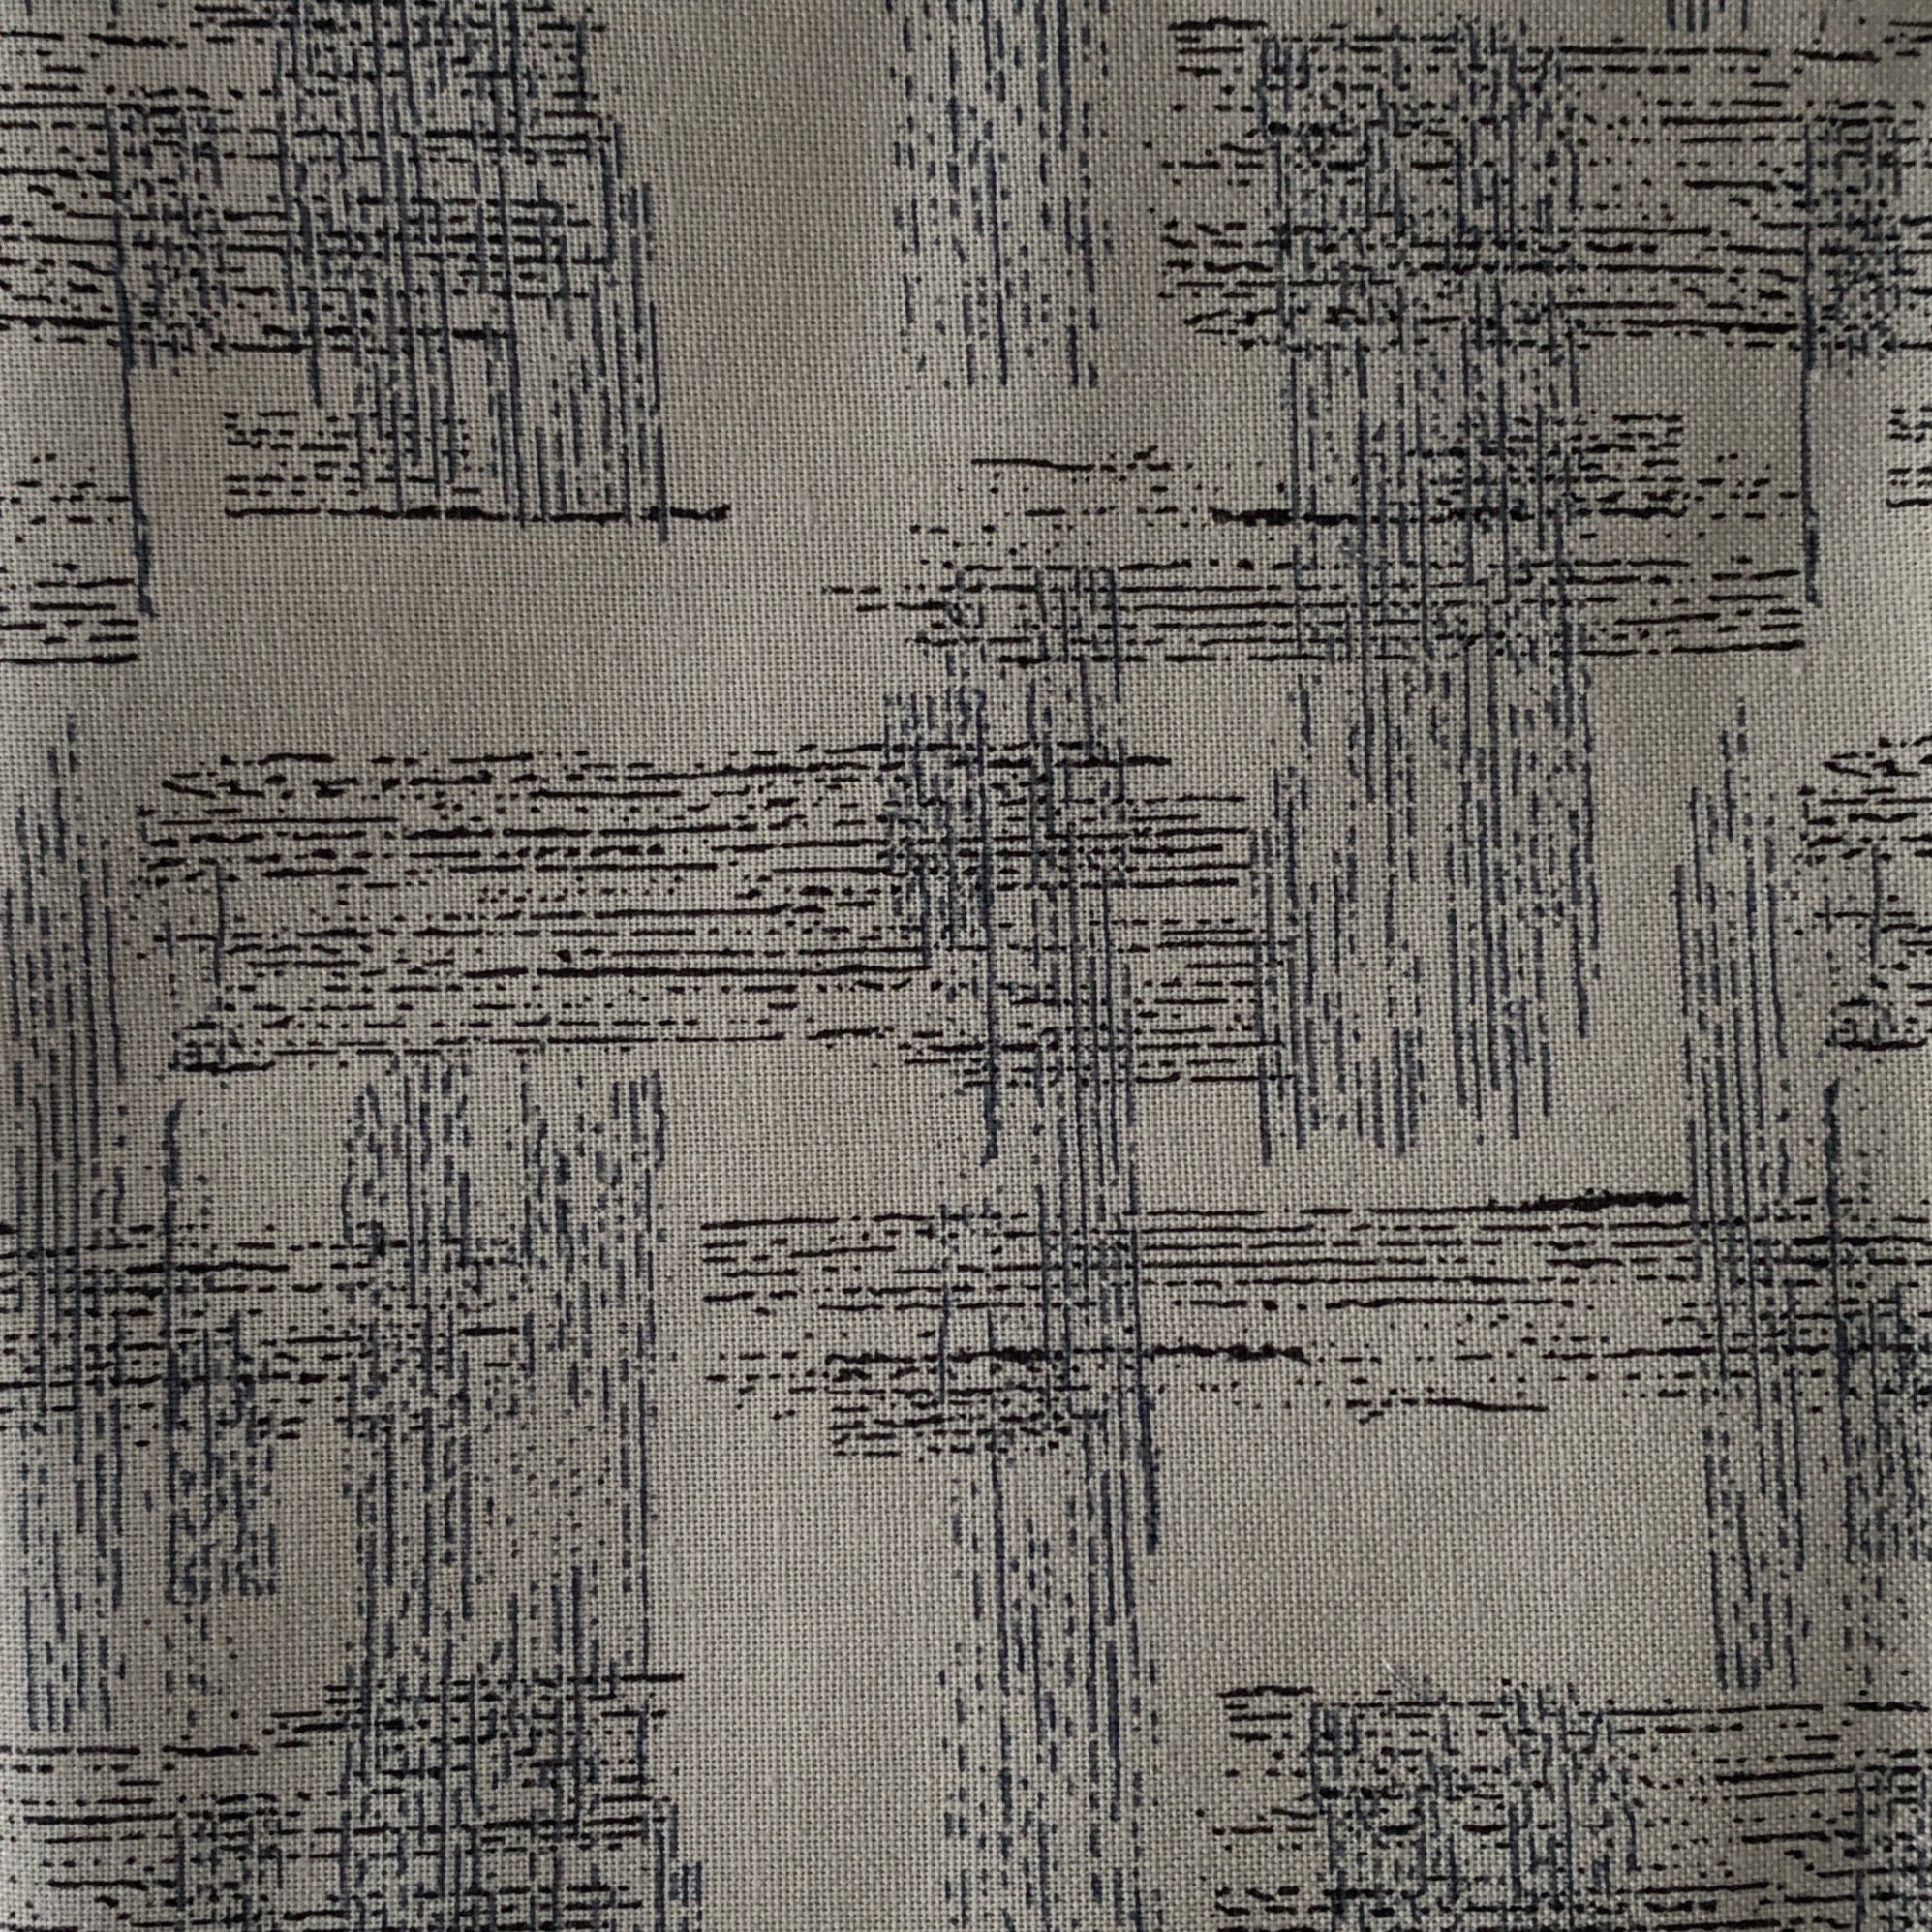 Sale Fabric 113 : Light Grey with blue/black lines 1/4m 20” x 22" approx